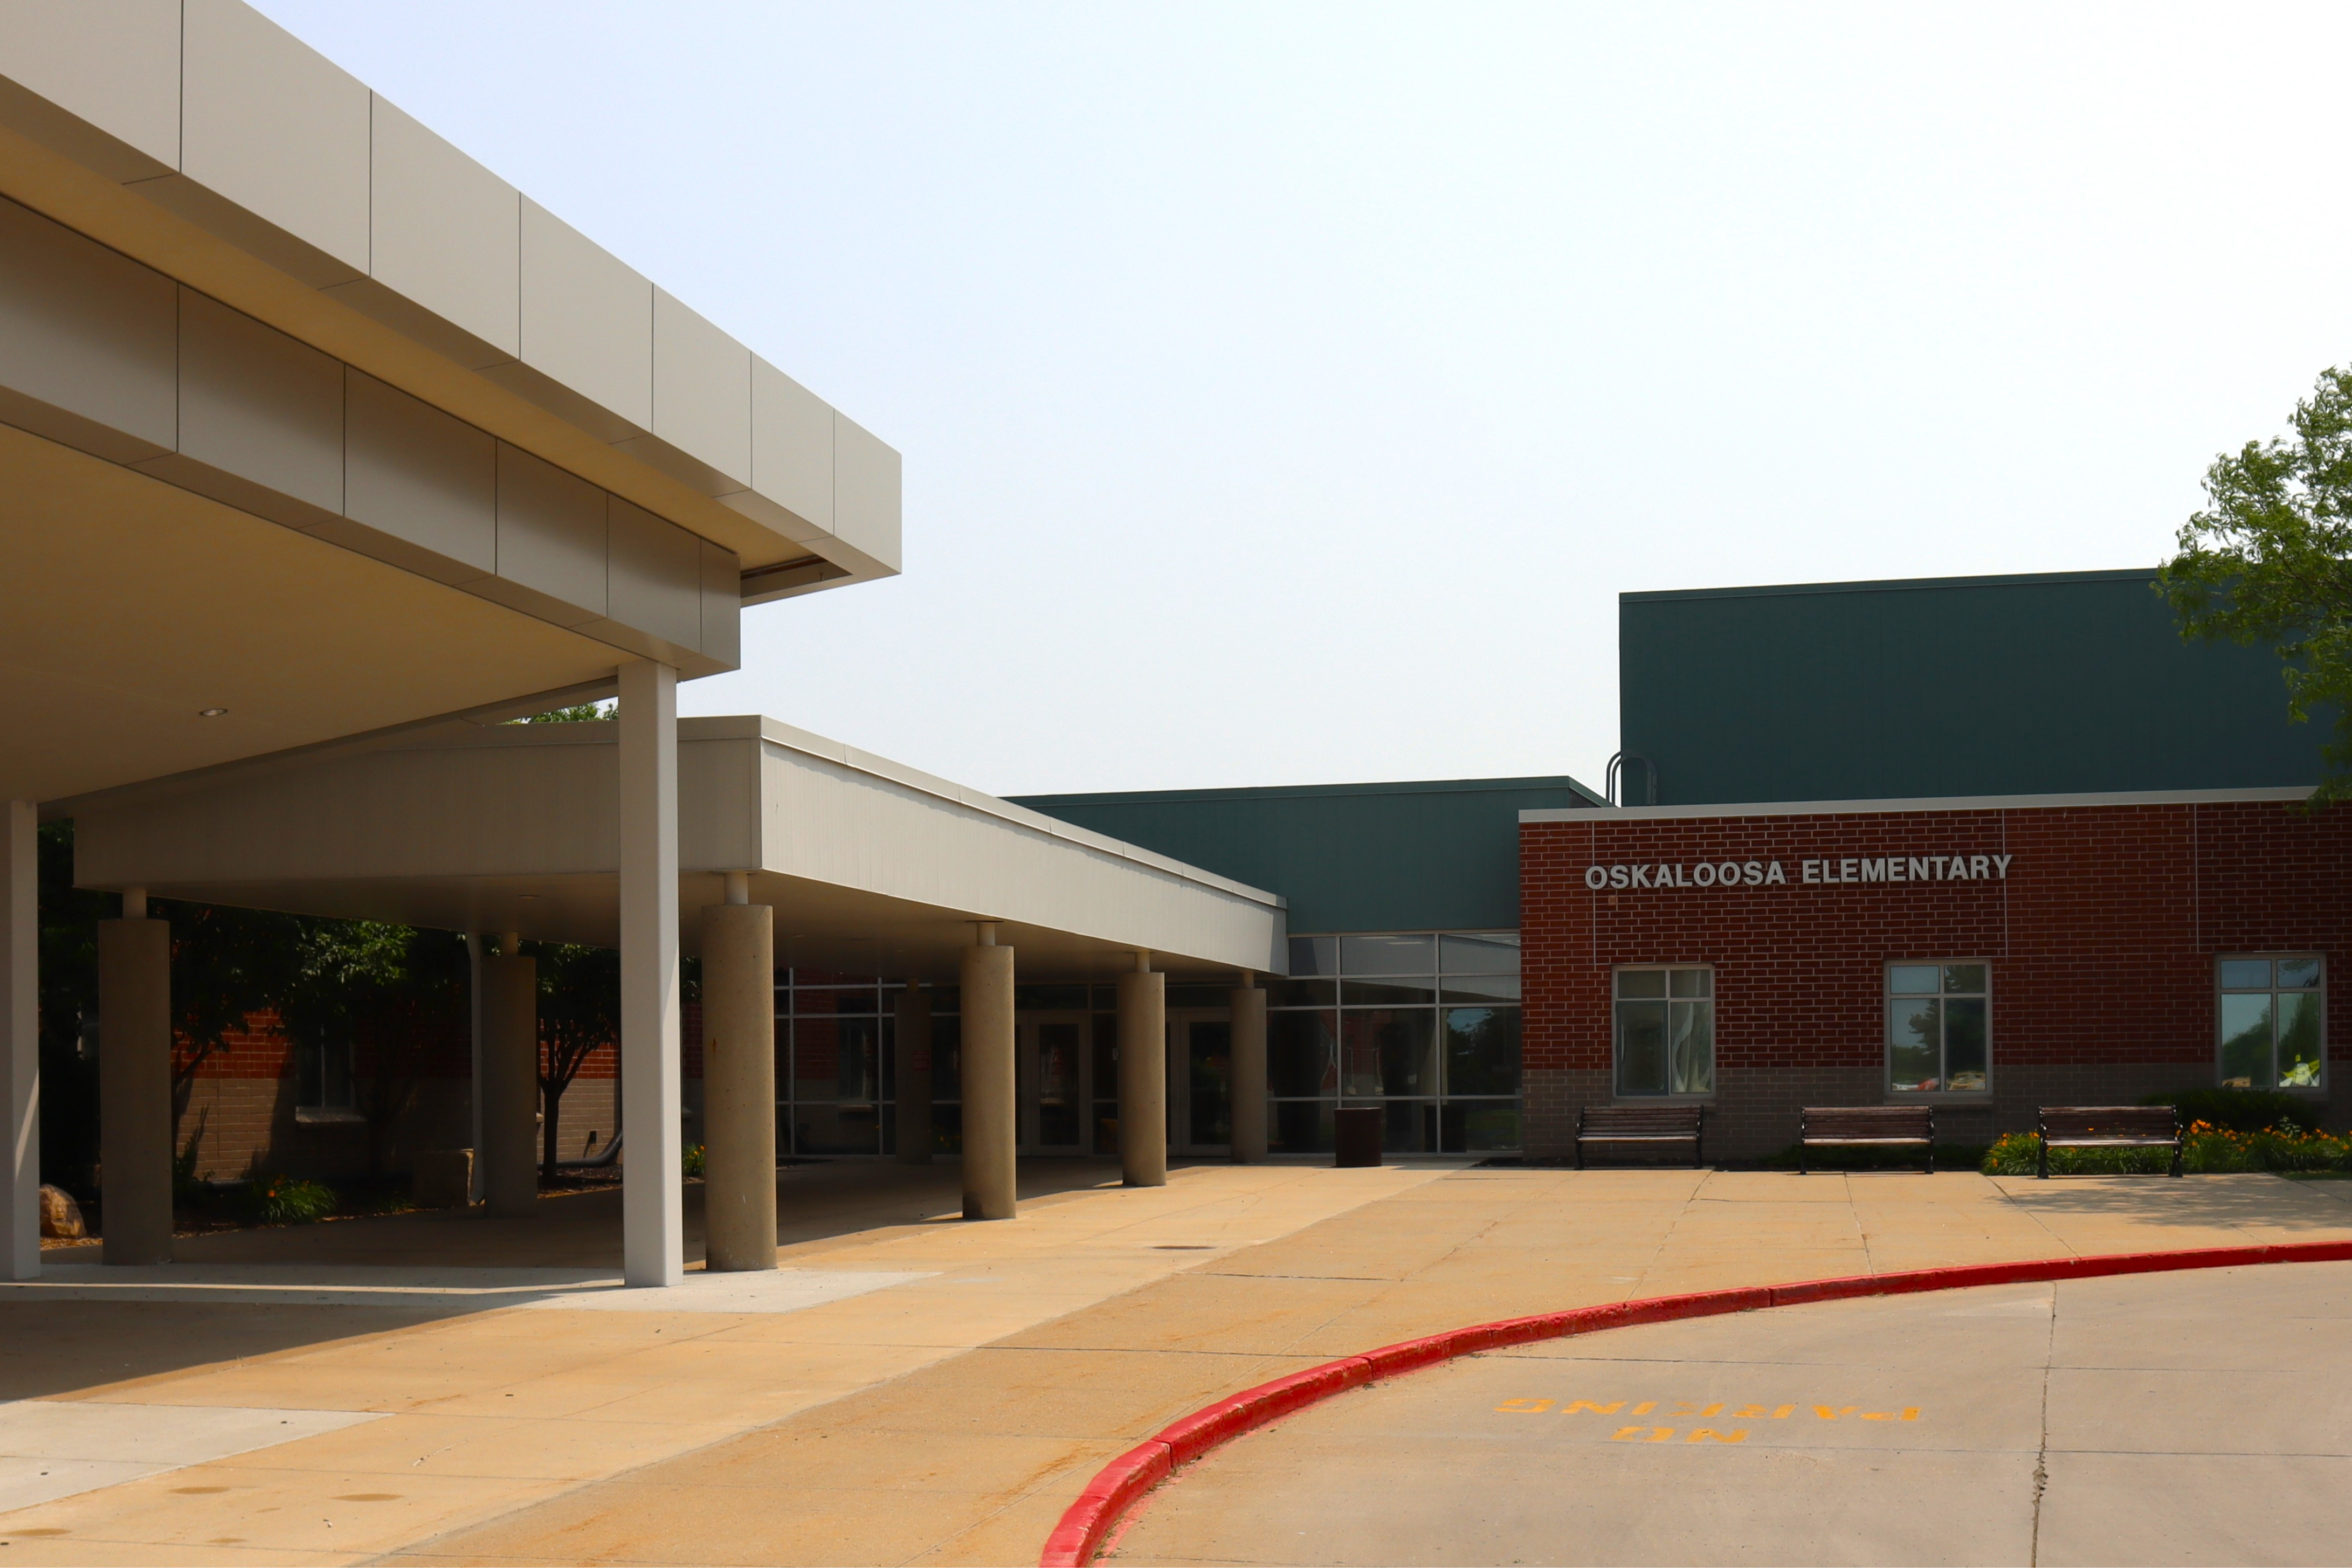 Elementary main entrance on west side